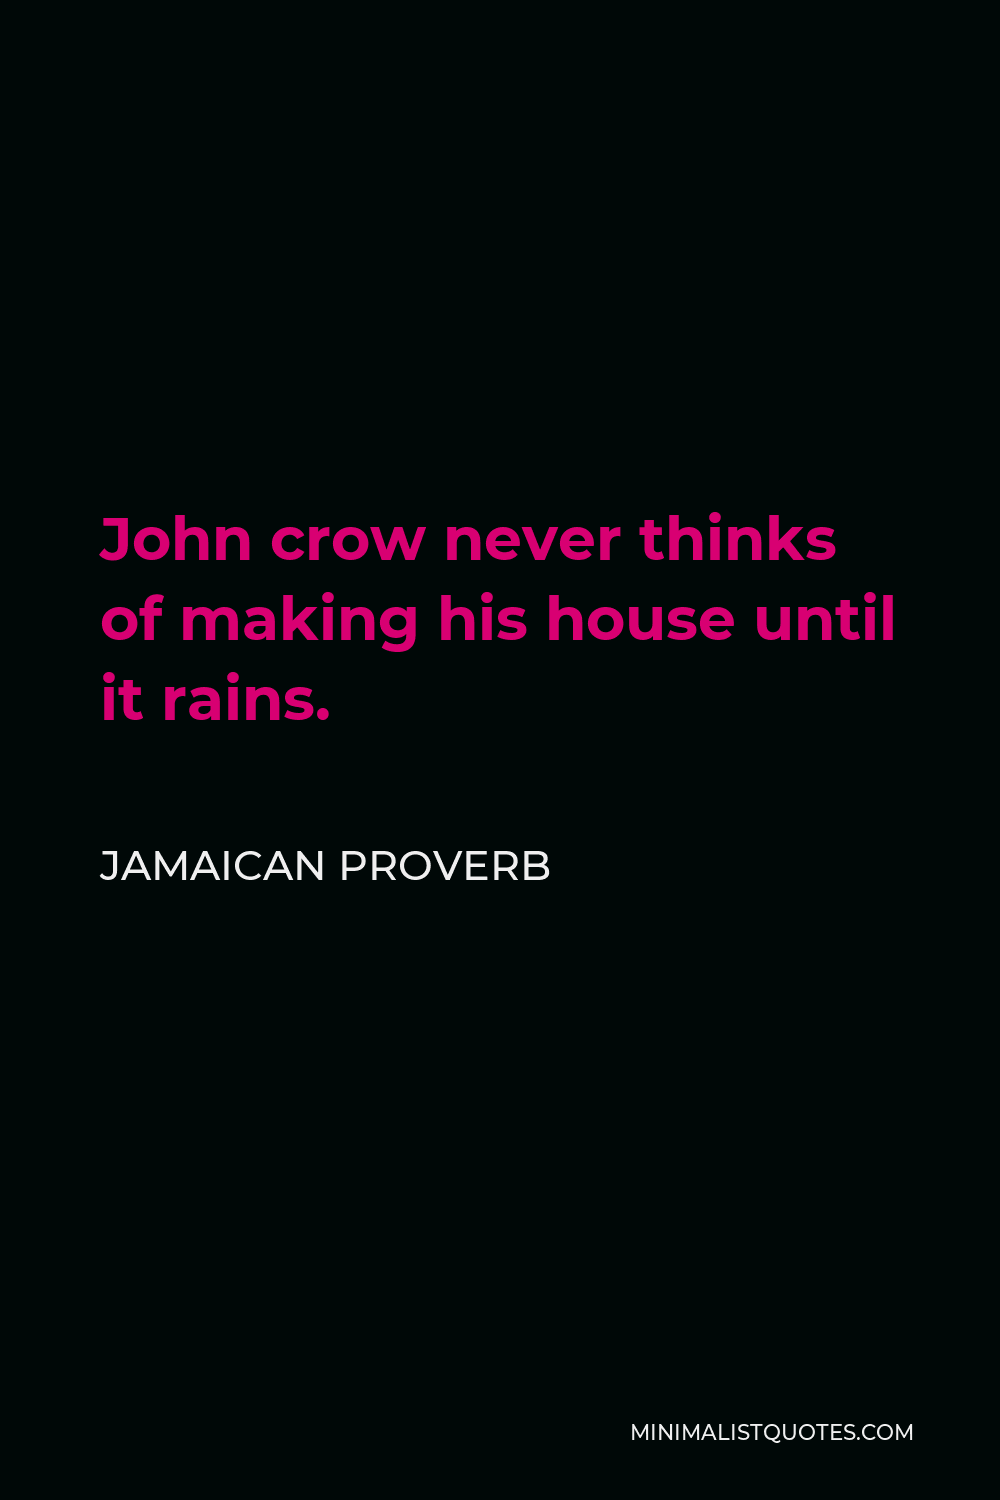 Jamaican Proverb Quote - John crow never thinks of making his house until it rains.